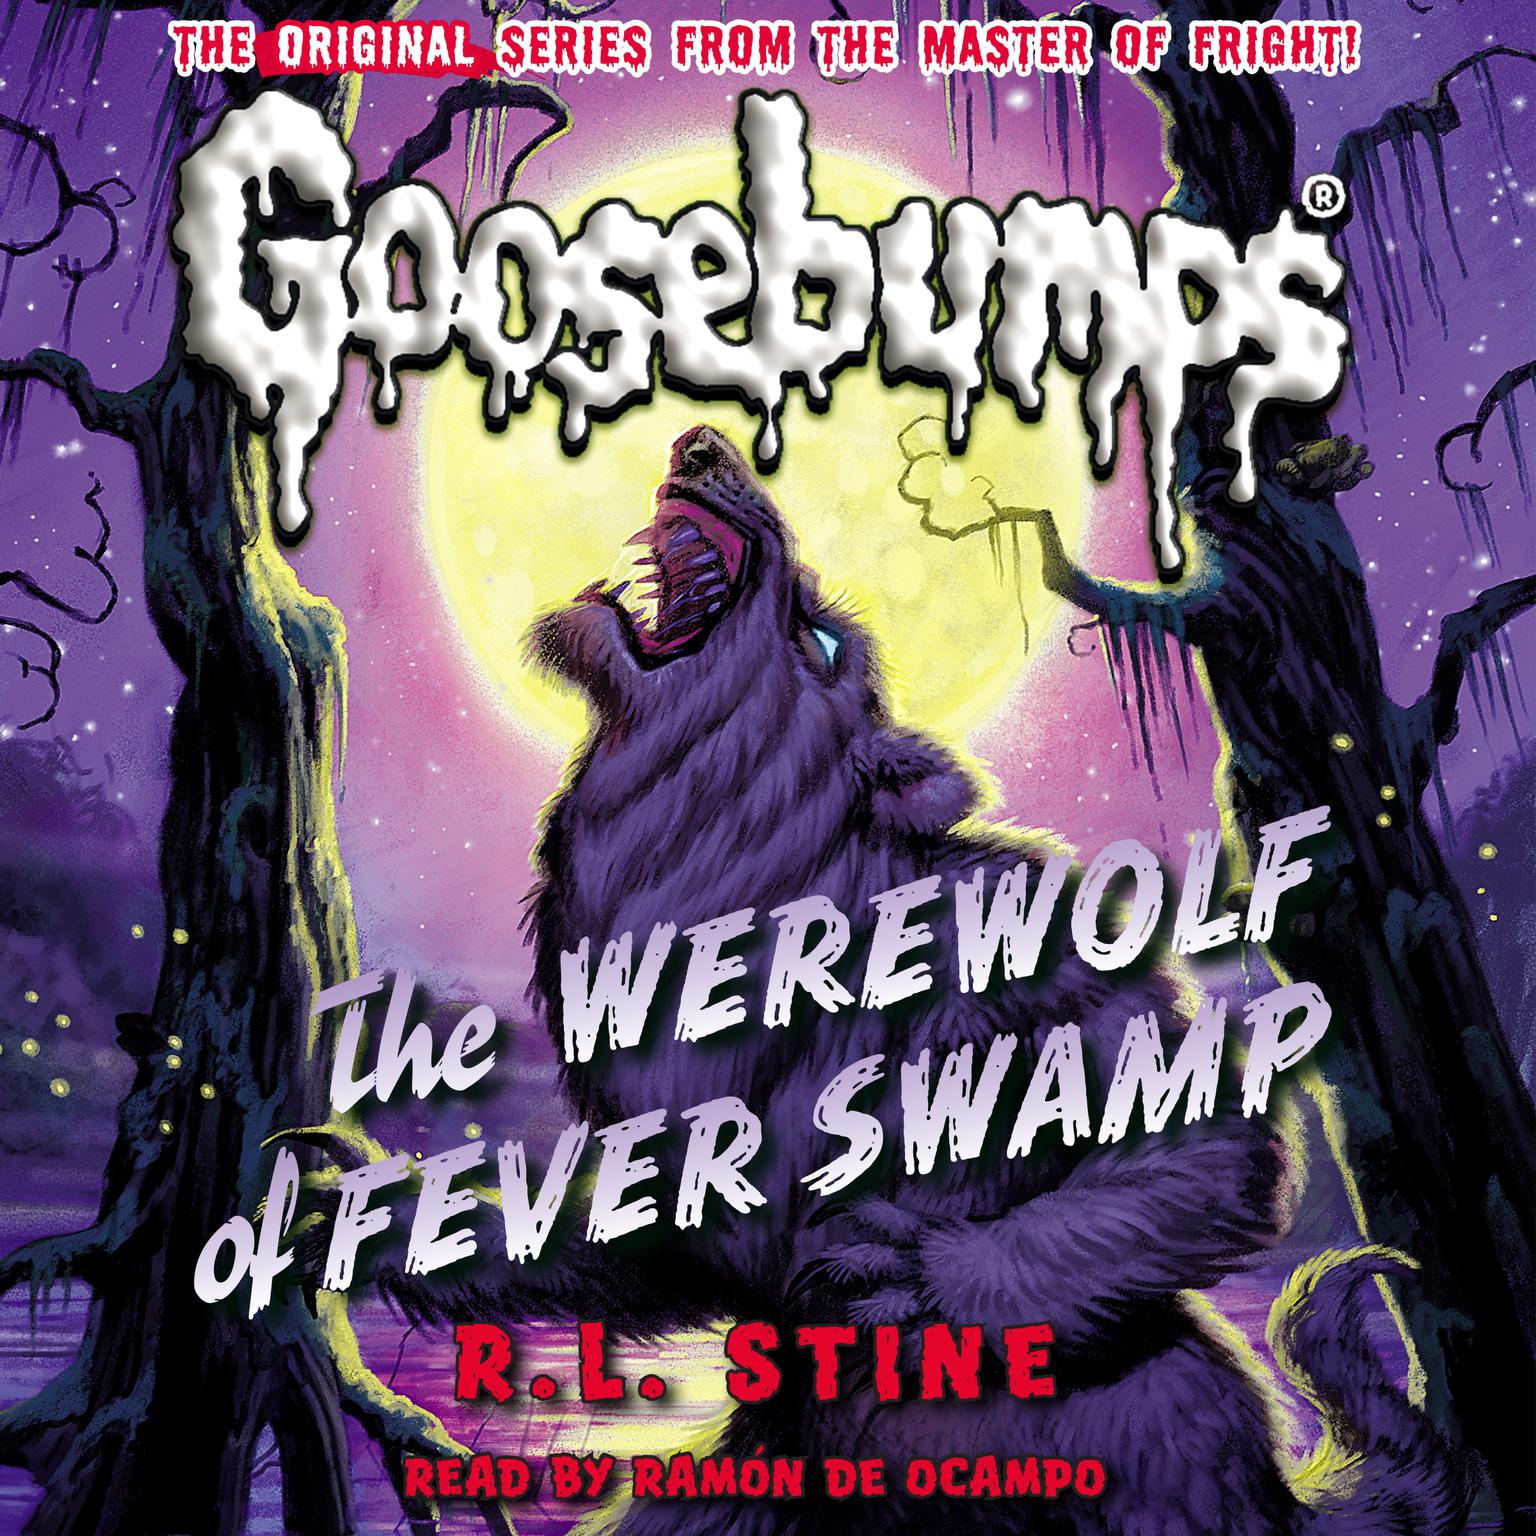 Werewolf of Fever Swamp (Classic Goosebumps #11) Audiobook, by R. L. Stine